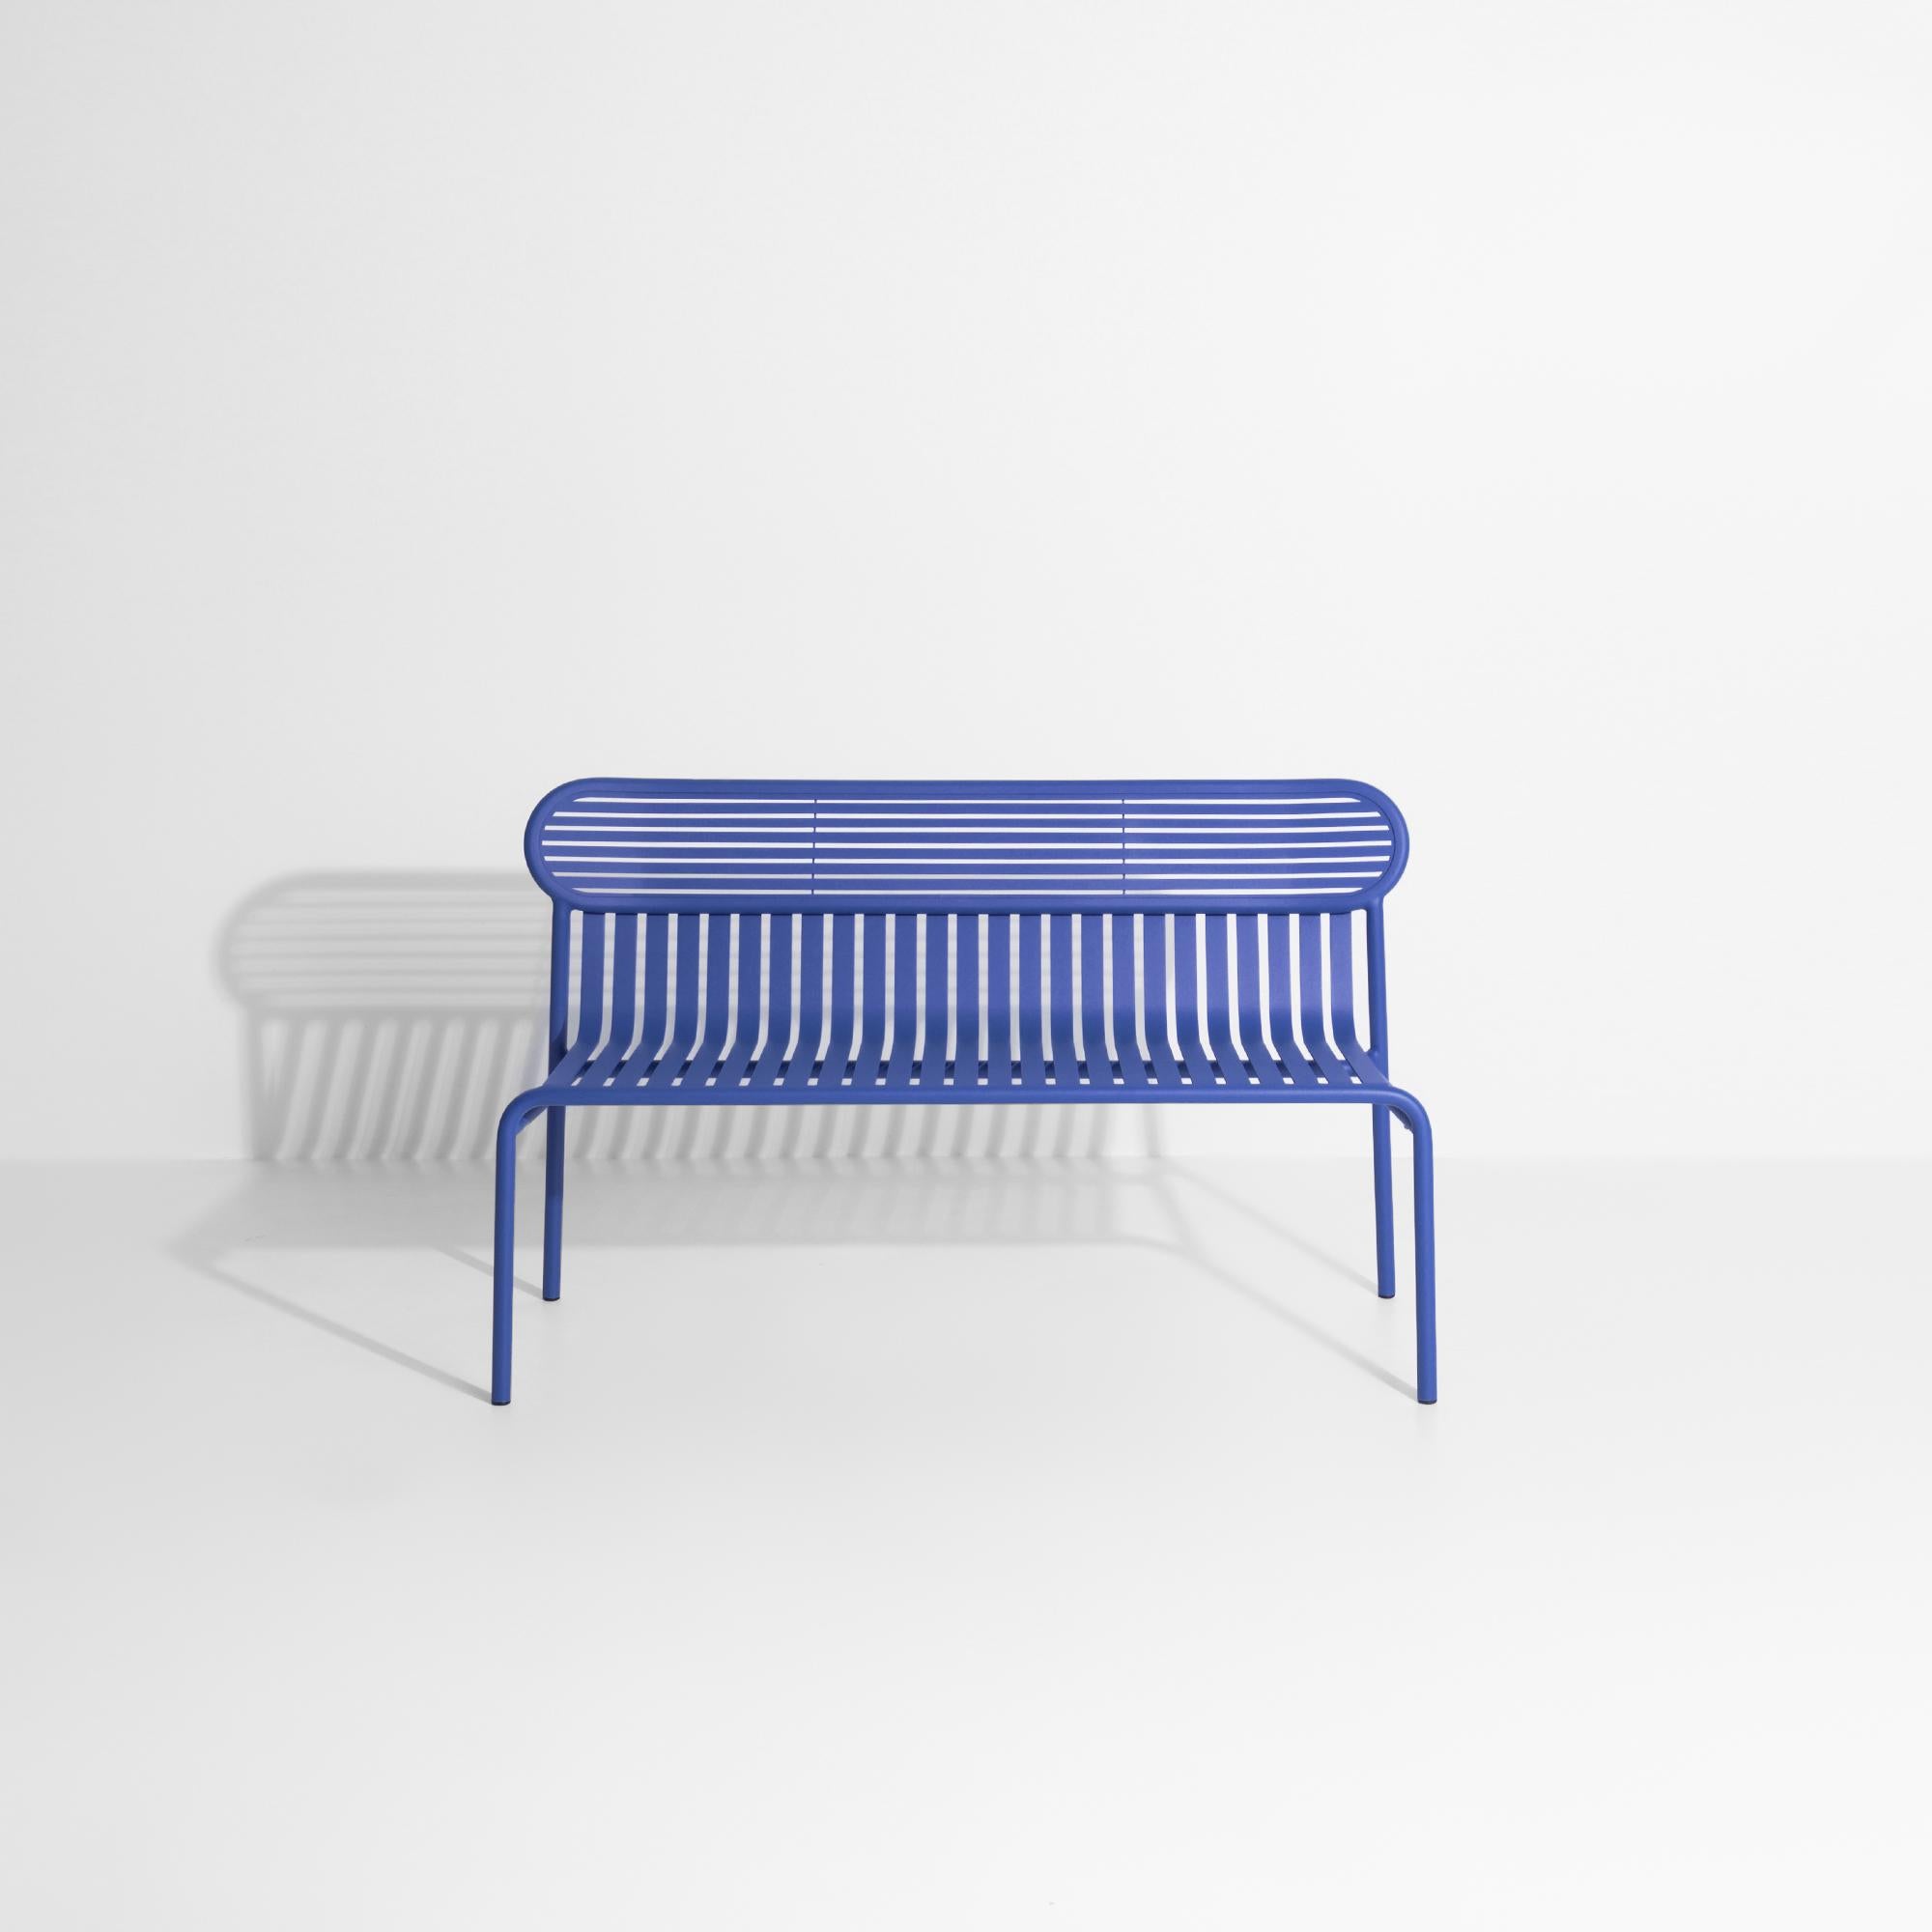 Petite Friture Week-End Bench in Blue Aluminium by Studio BrichetZiegler In New Condition For Sale In Brooklyn, NY